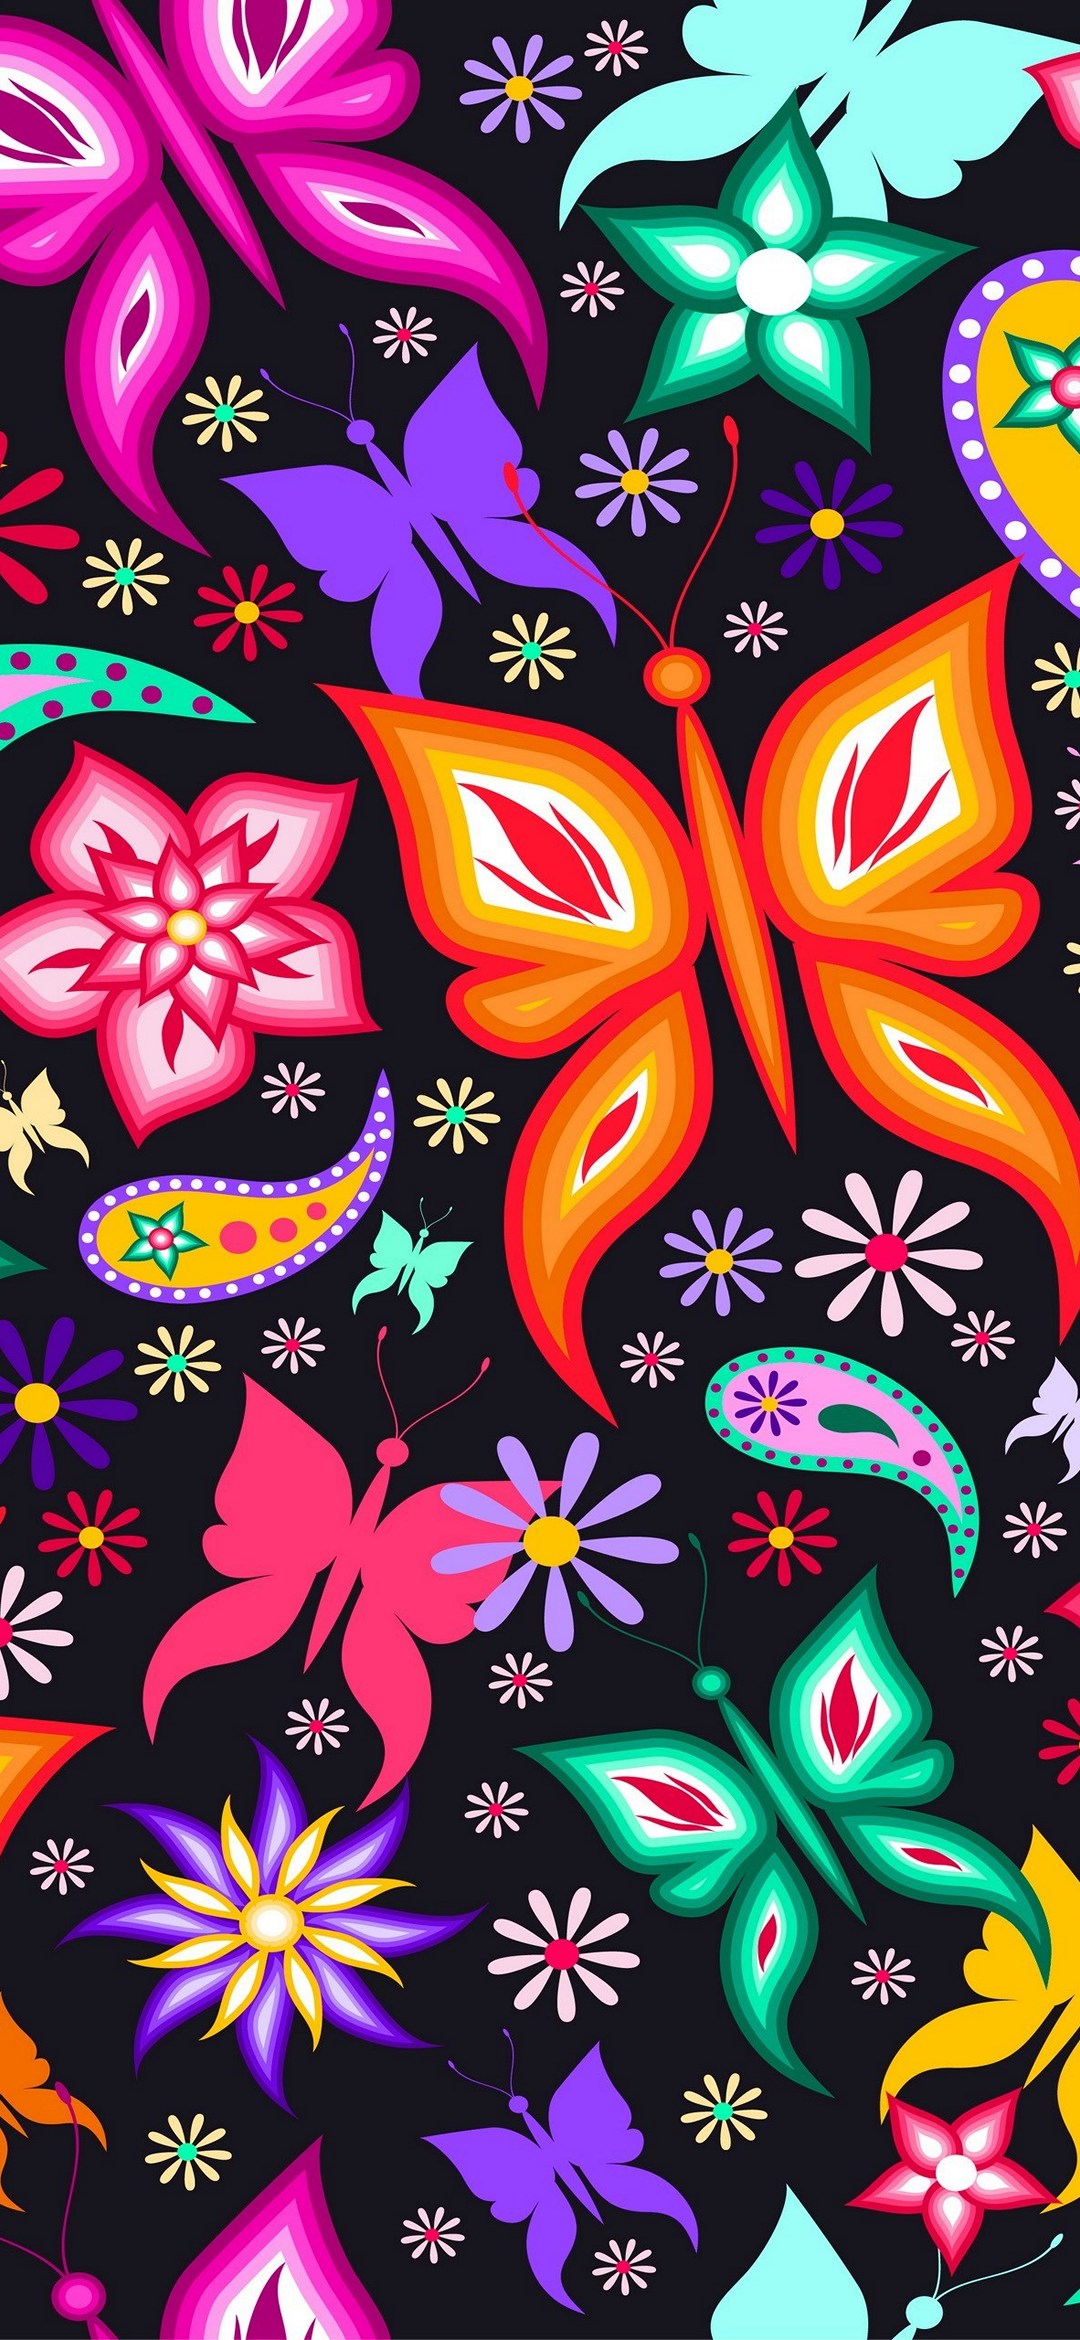 Pink, purple and orange butterflies and flowers art RedMagic 5 Android 壁紙・待ち受け